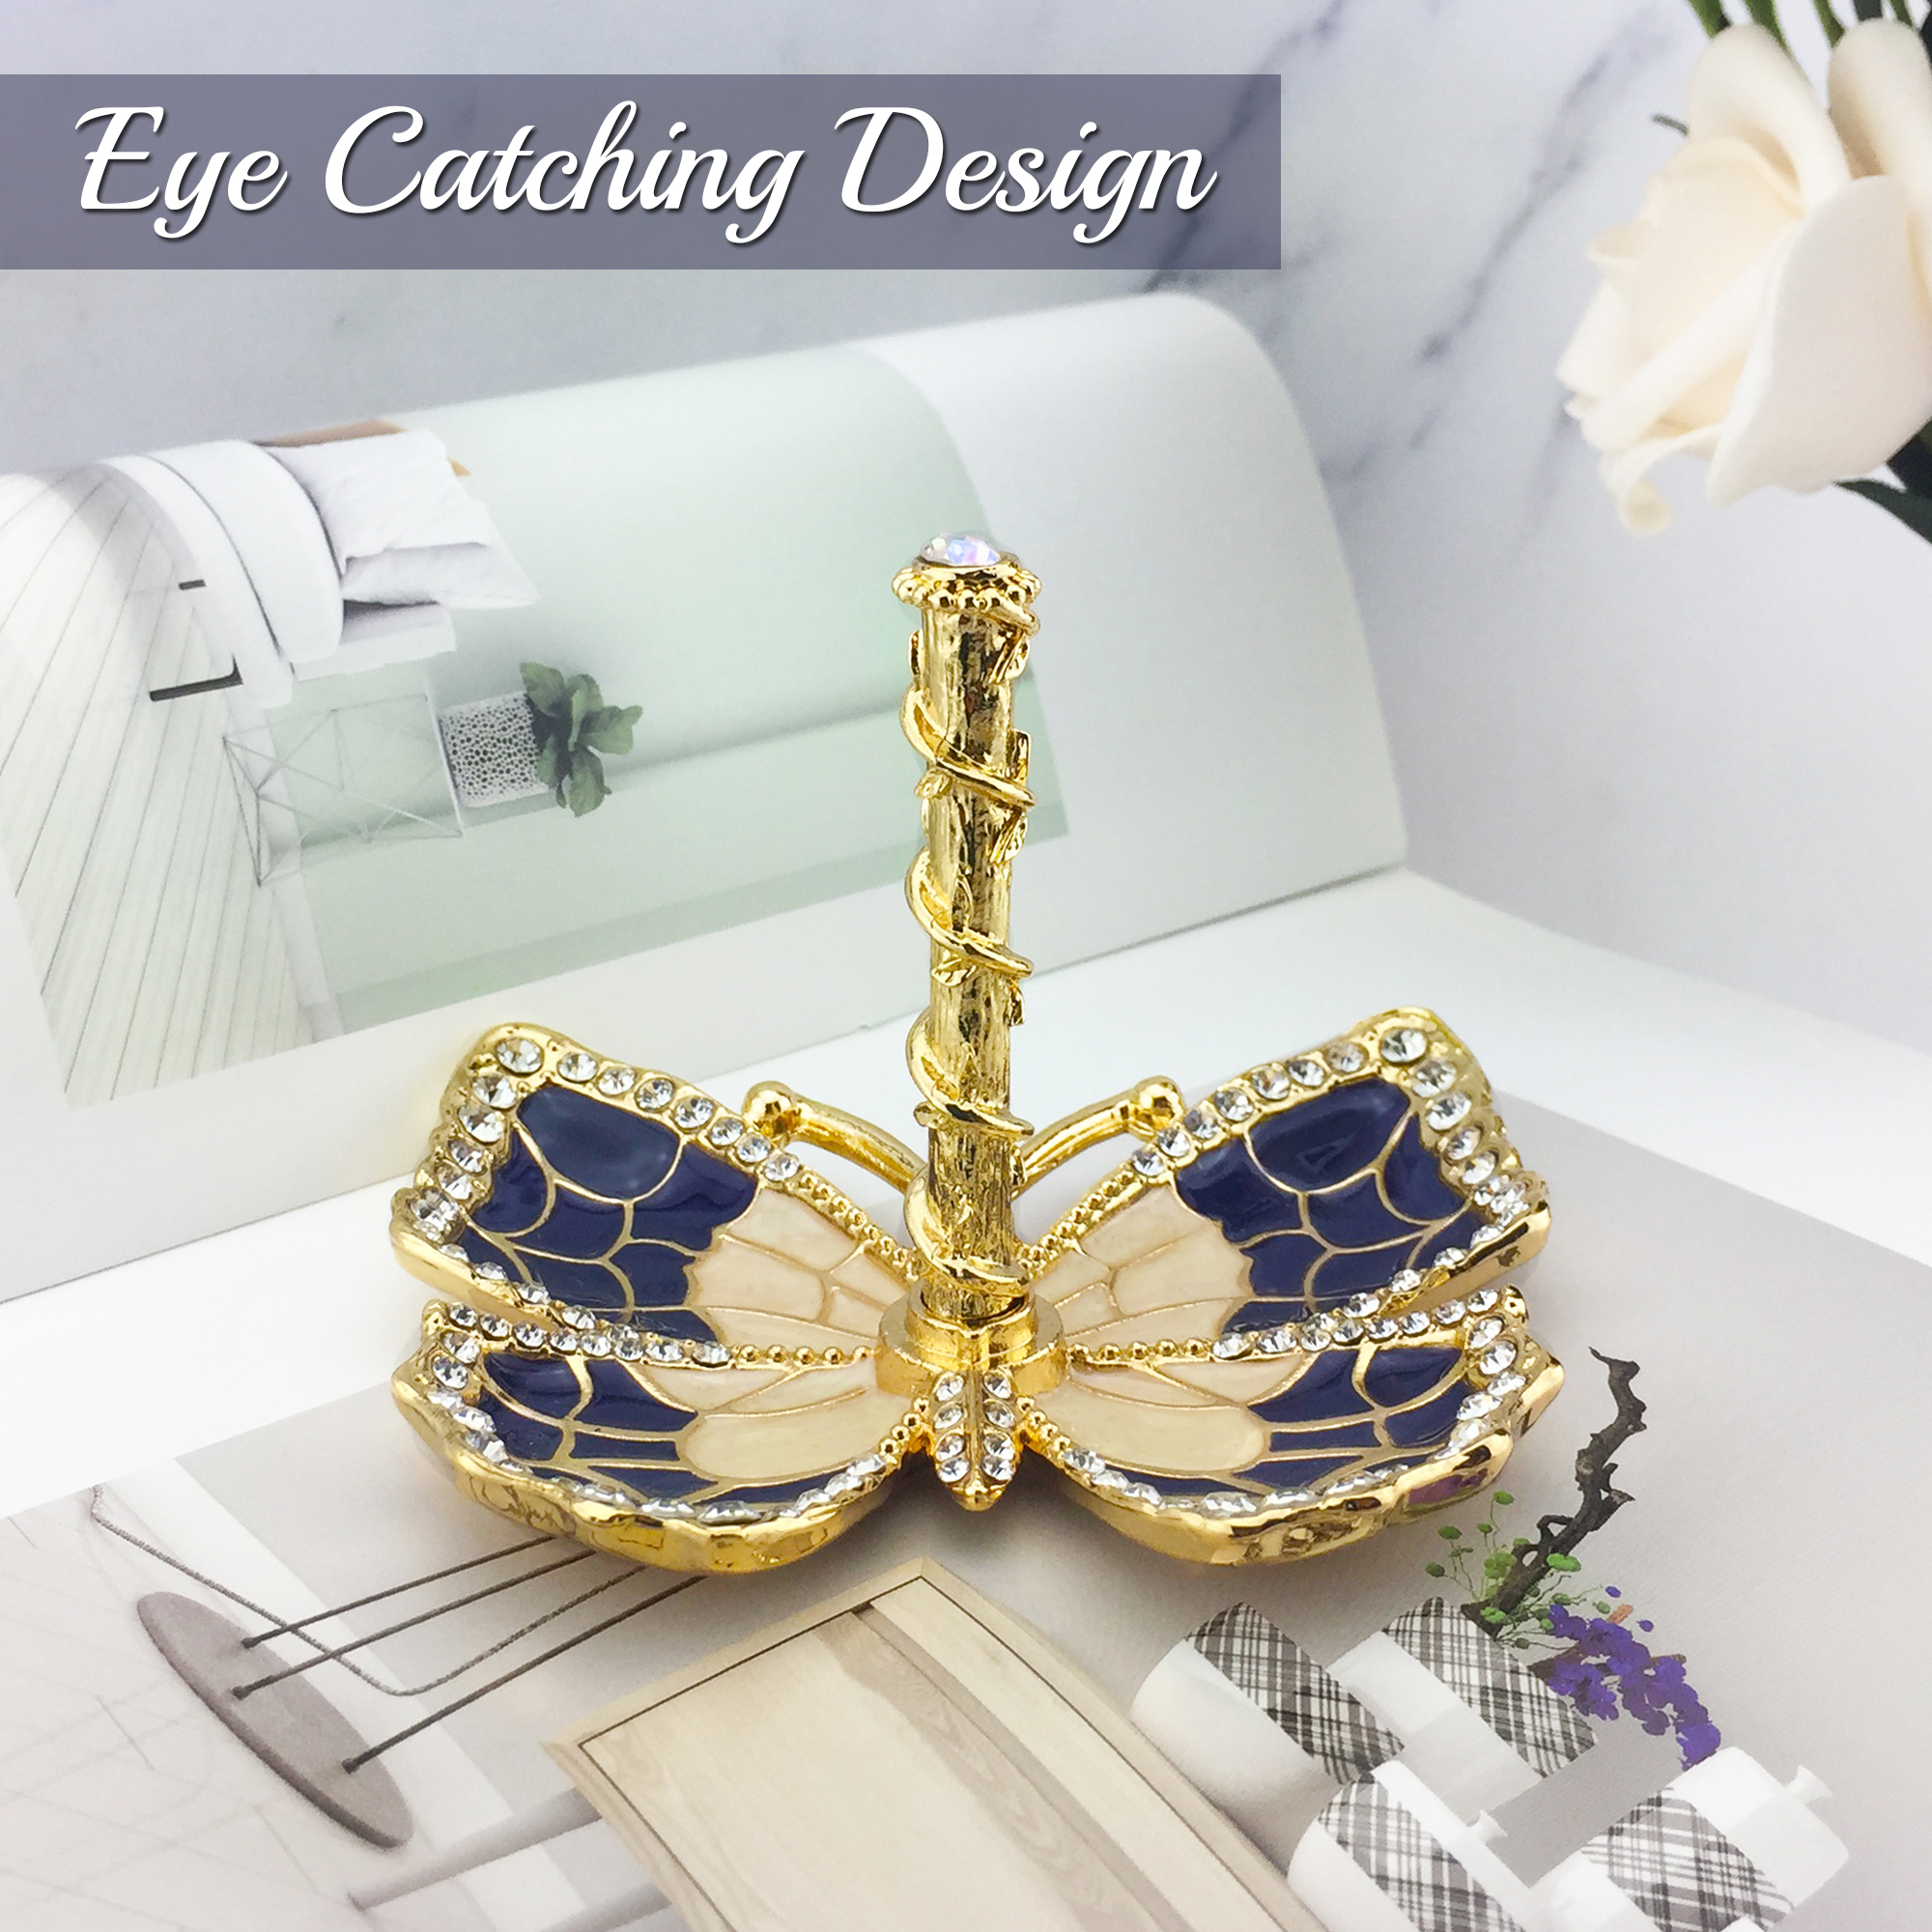 Matashi Blue Enamel And Gold Plated Butterfly Jewelry Ring Holder With Crystals, Gift For Christmas Birthday, Gift For Mom Wife Girlfriend